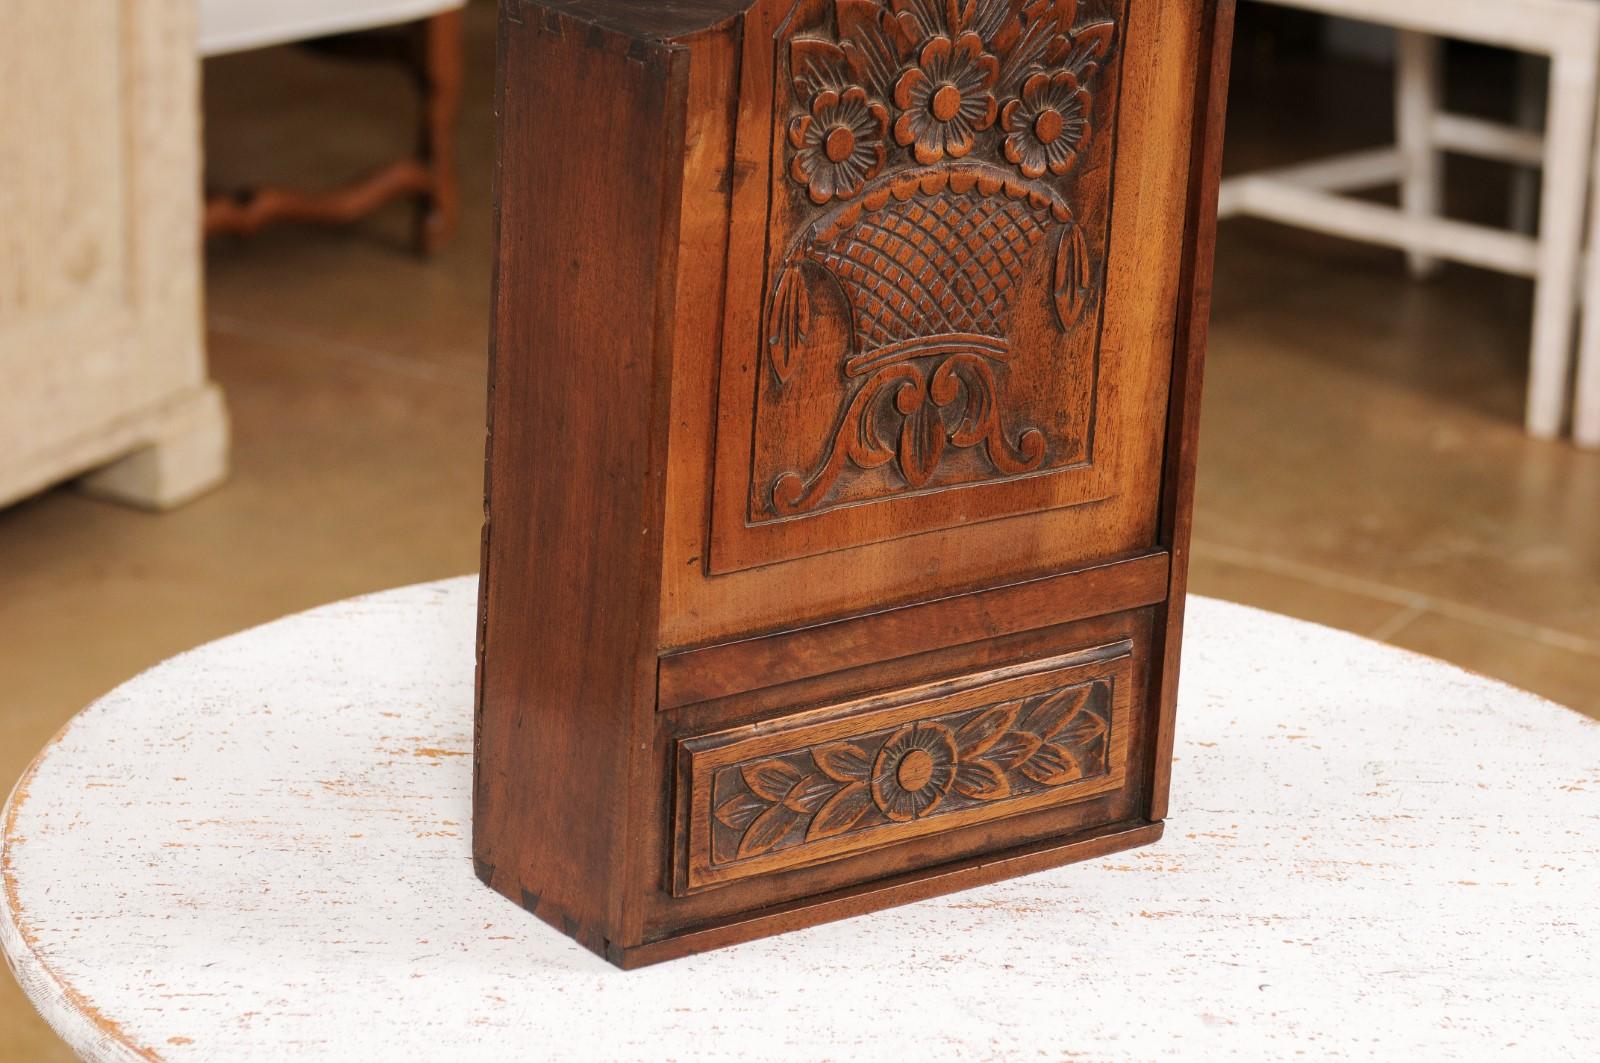 19th Century French, 1890s Carved Wooden Farinerio Decorative Box with Floral Décor